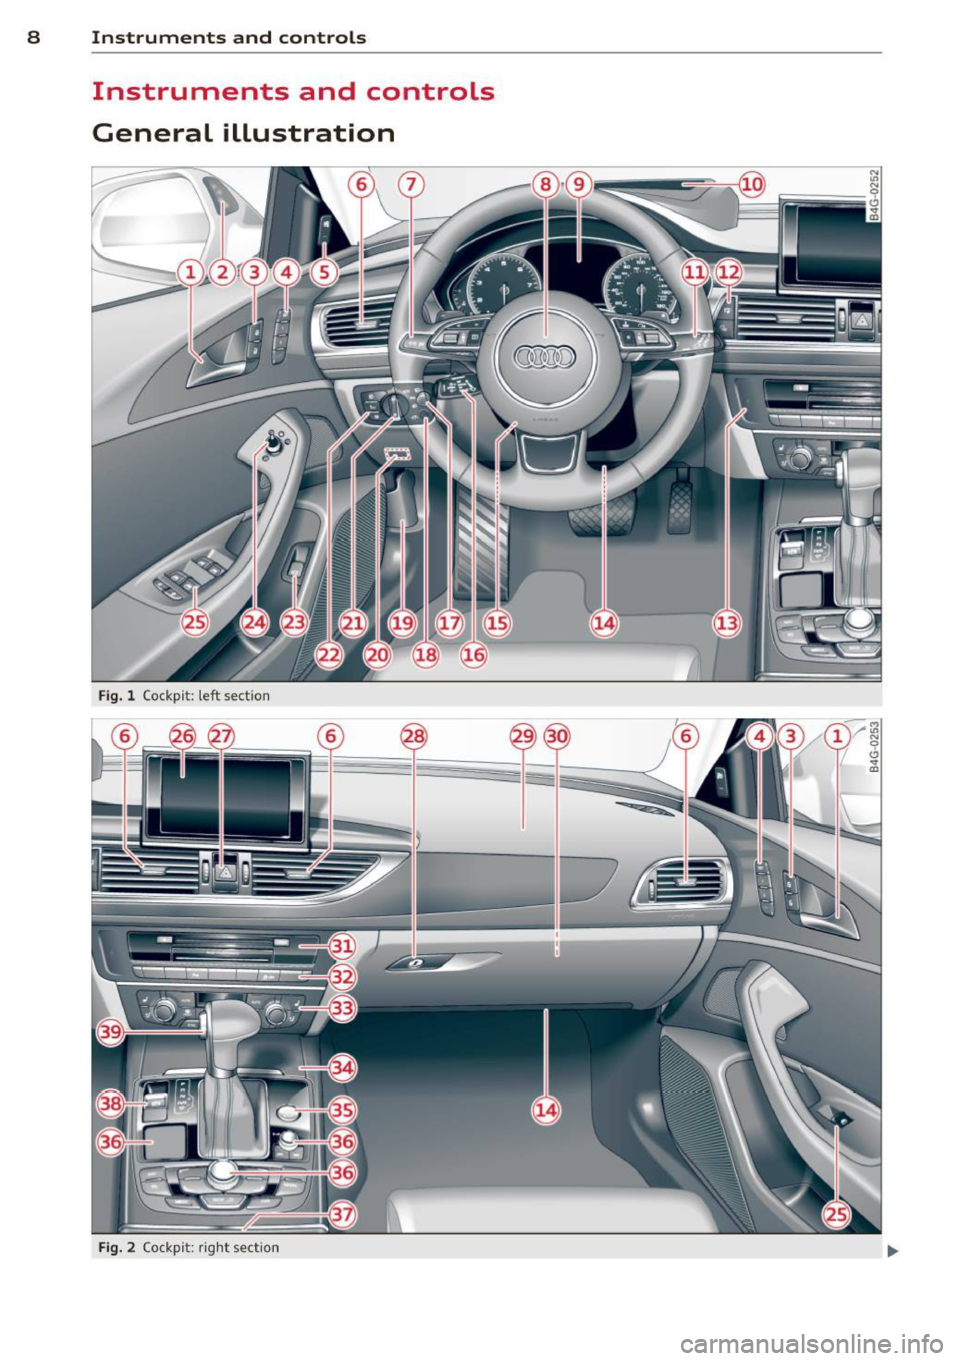 AUDI S6 2013  Owners Manual 8  Instruments and controls 
Instruments  and  controls 
General  illustration 
Fig. l Cockp it:  left  sect io n 
Fig. 2 Co ck pi t: ri ght  sect io n  